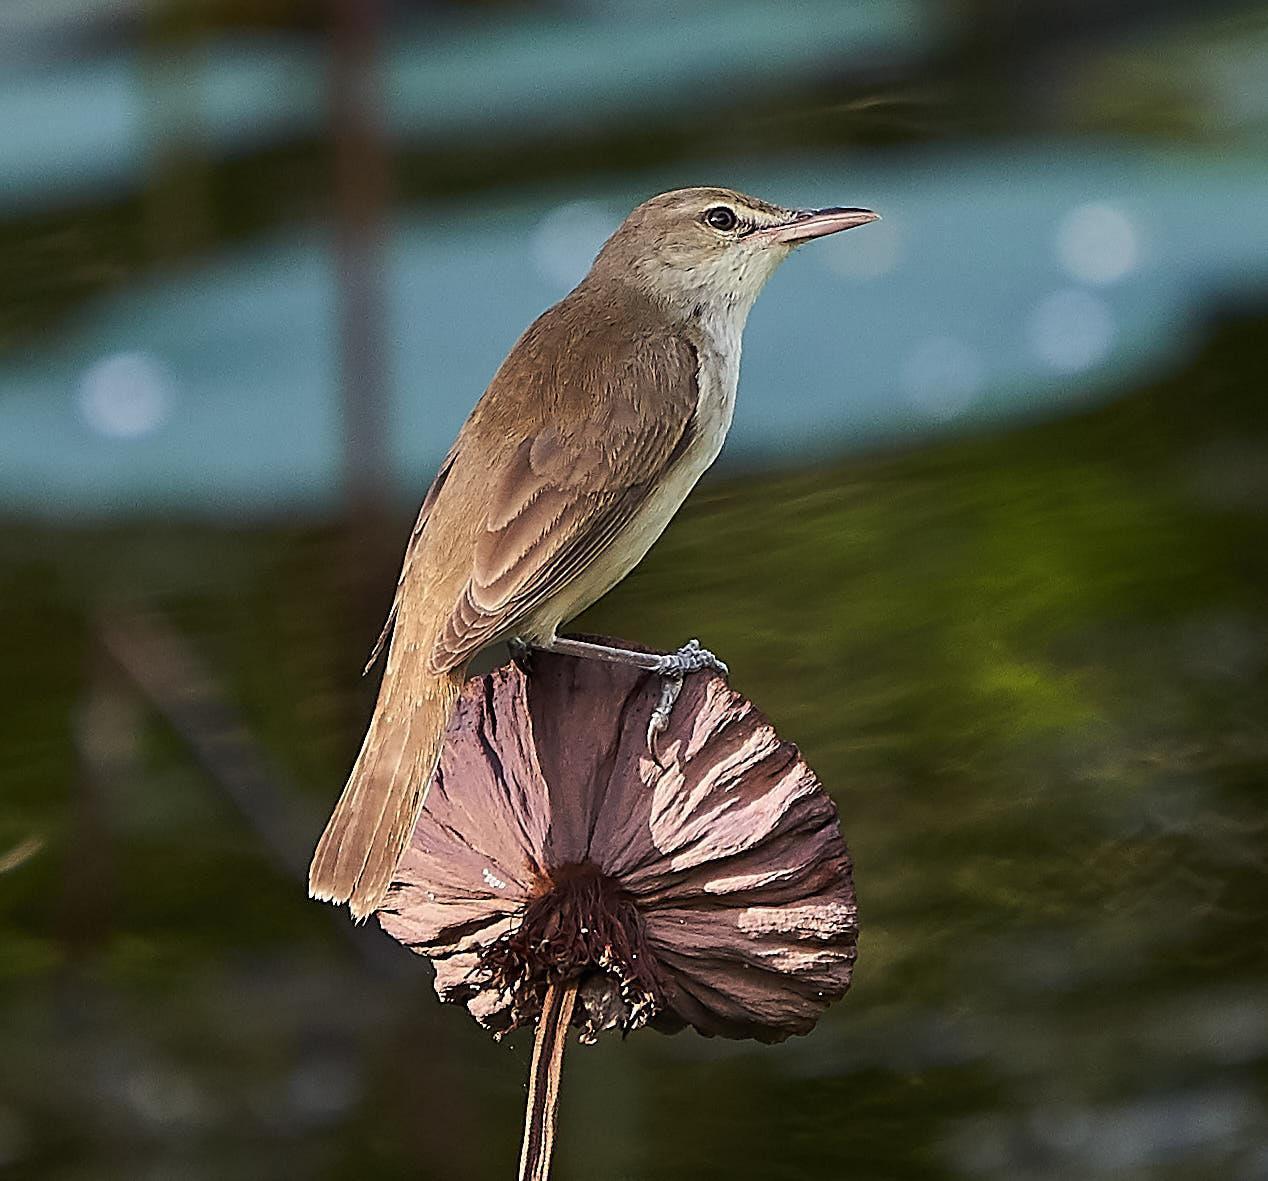 Oriental Reed Warbler Photo by Steven Cheong